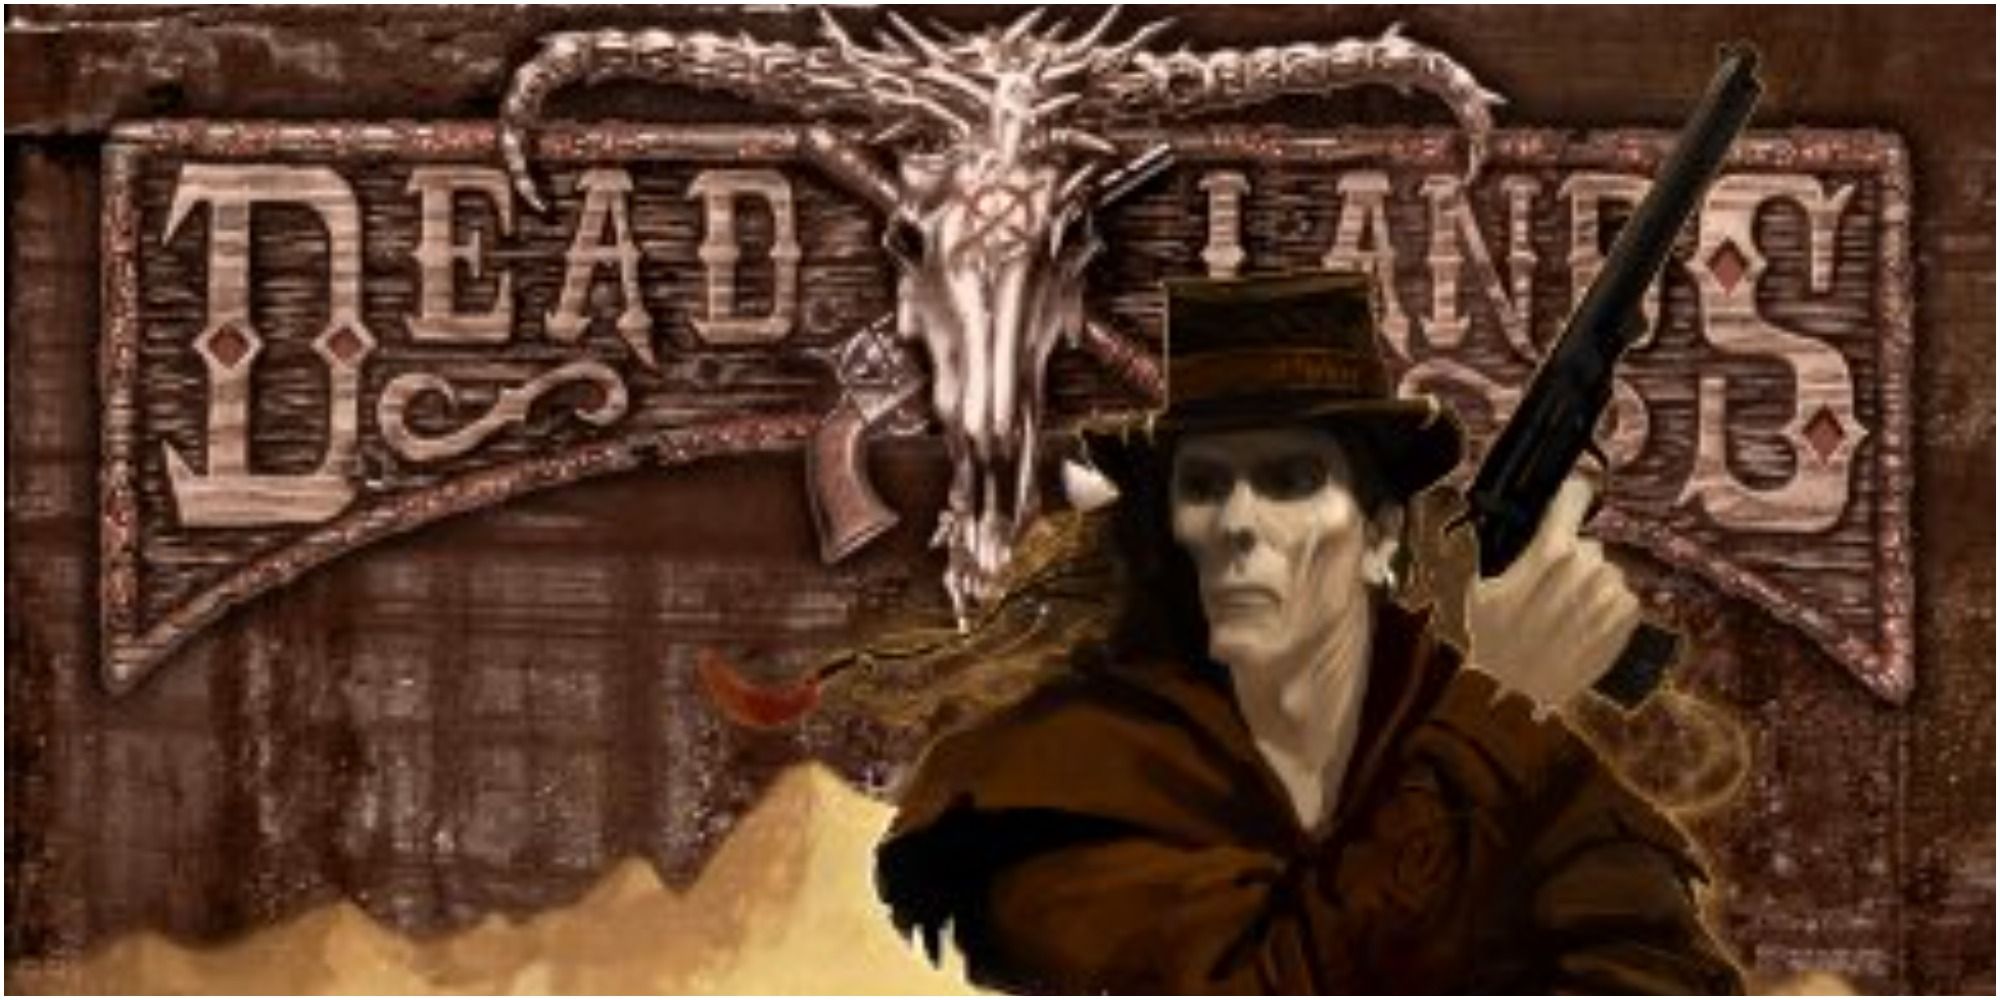 deadlands cover and logo